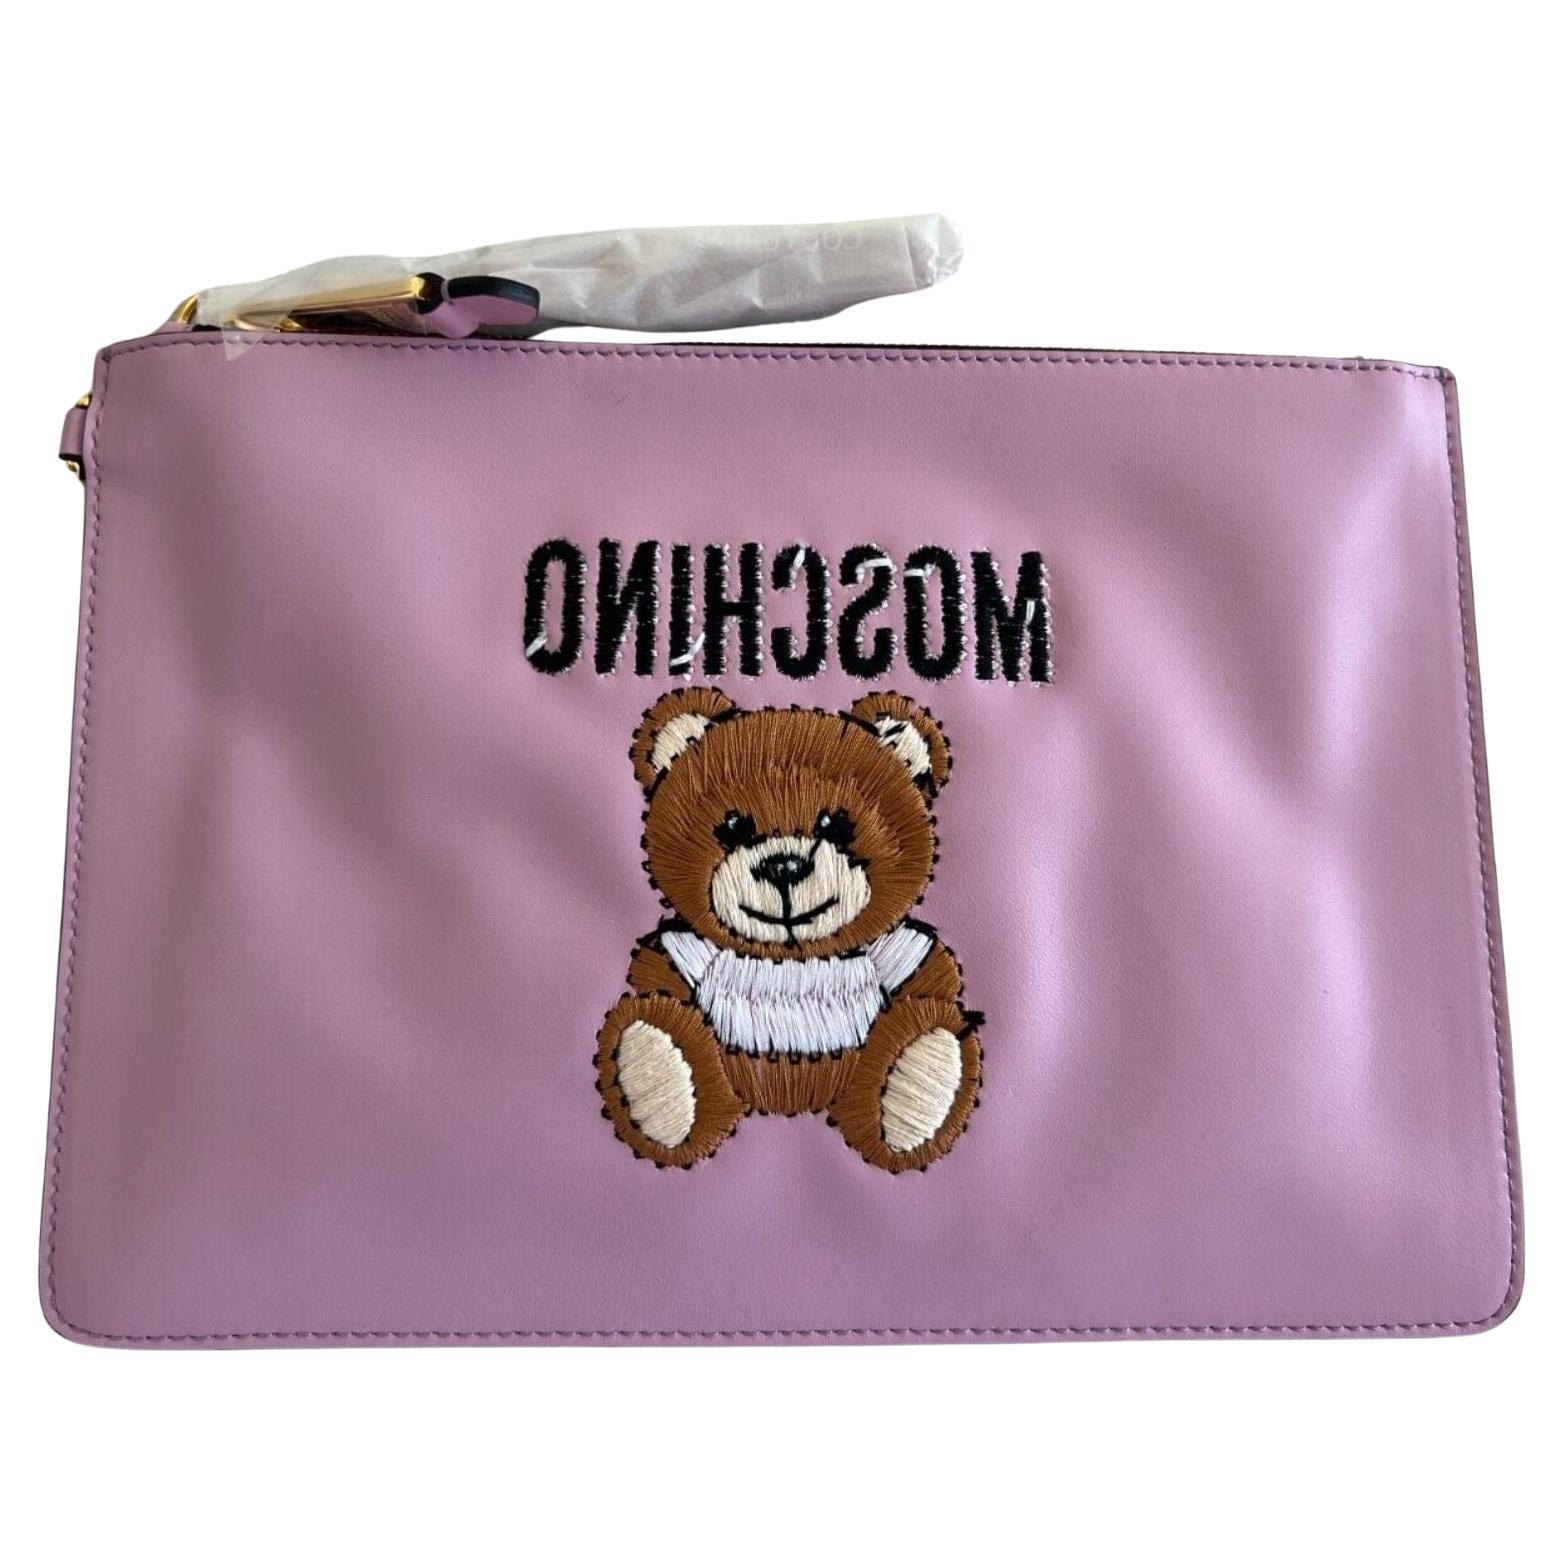 SS21 Moschino Couture Pink Clutch with Embroidered Teddy Bear by Jeremy Scott For Sale